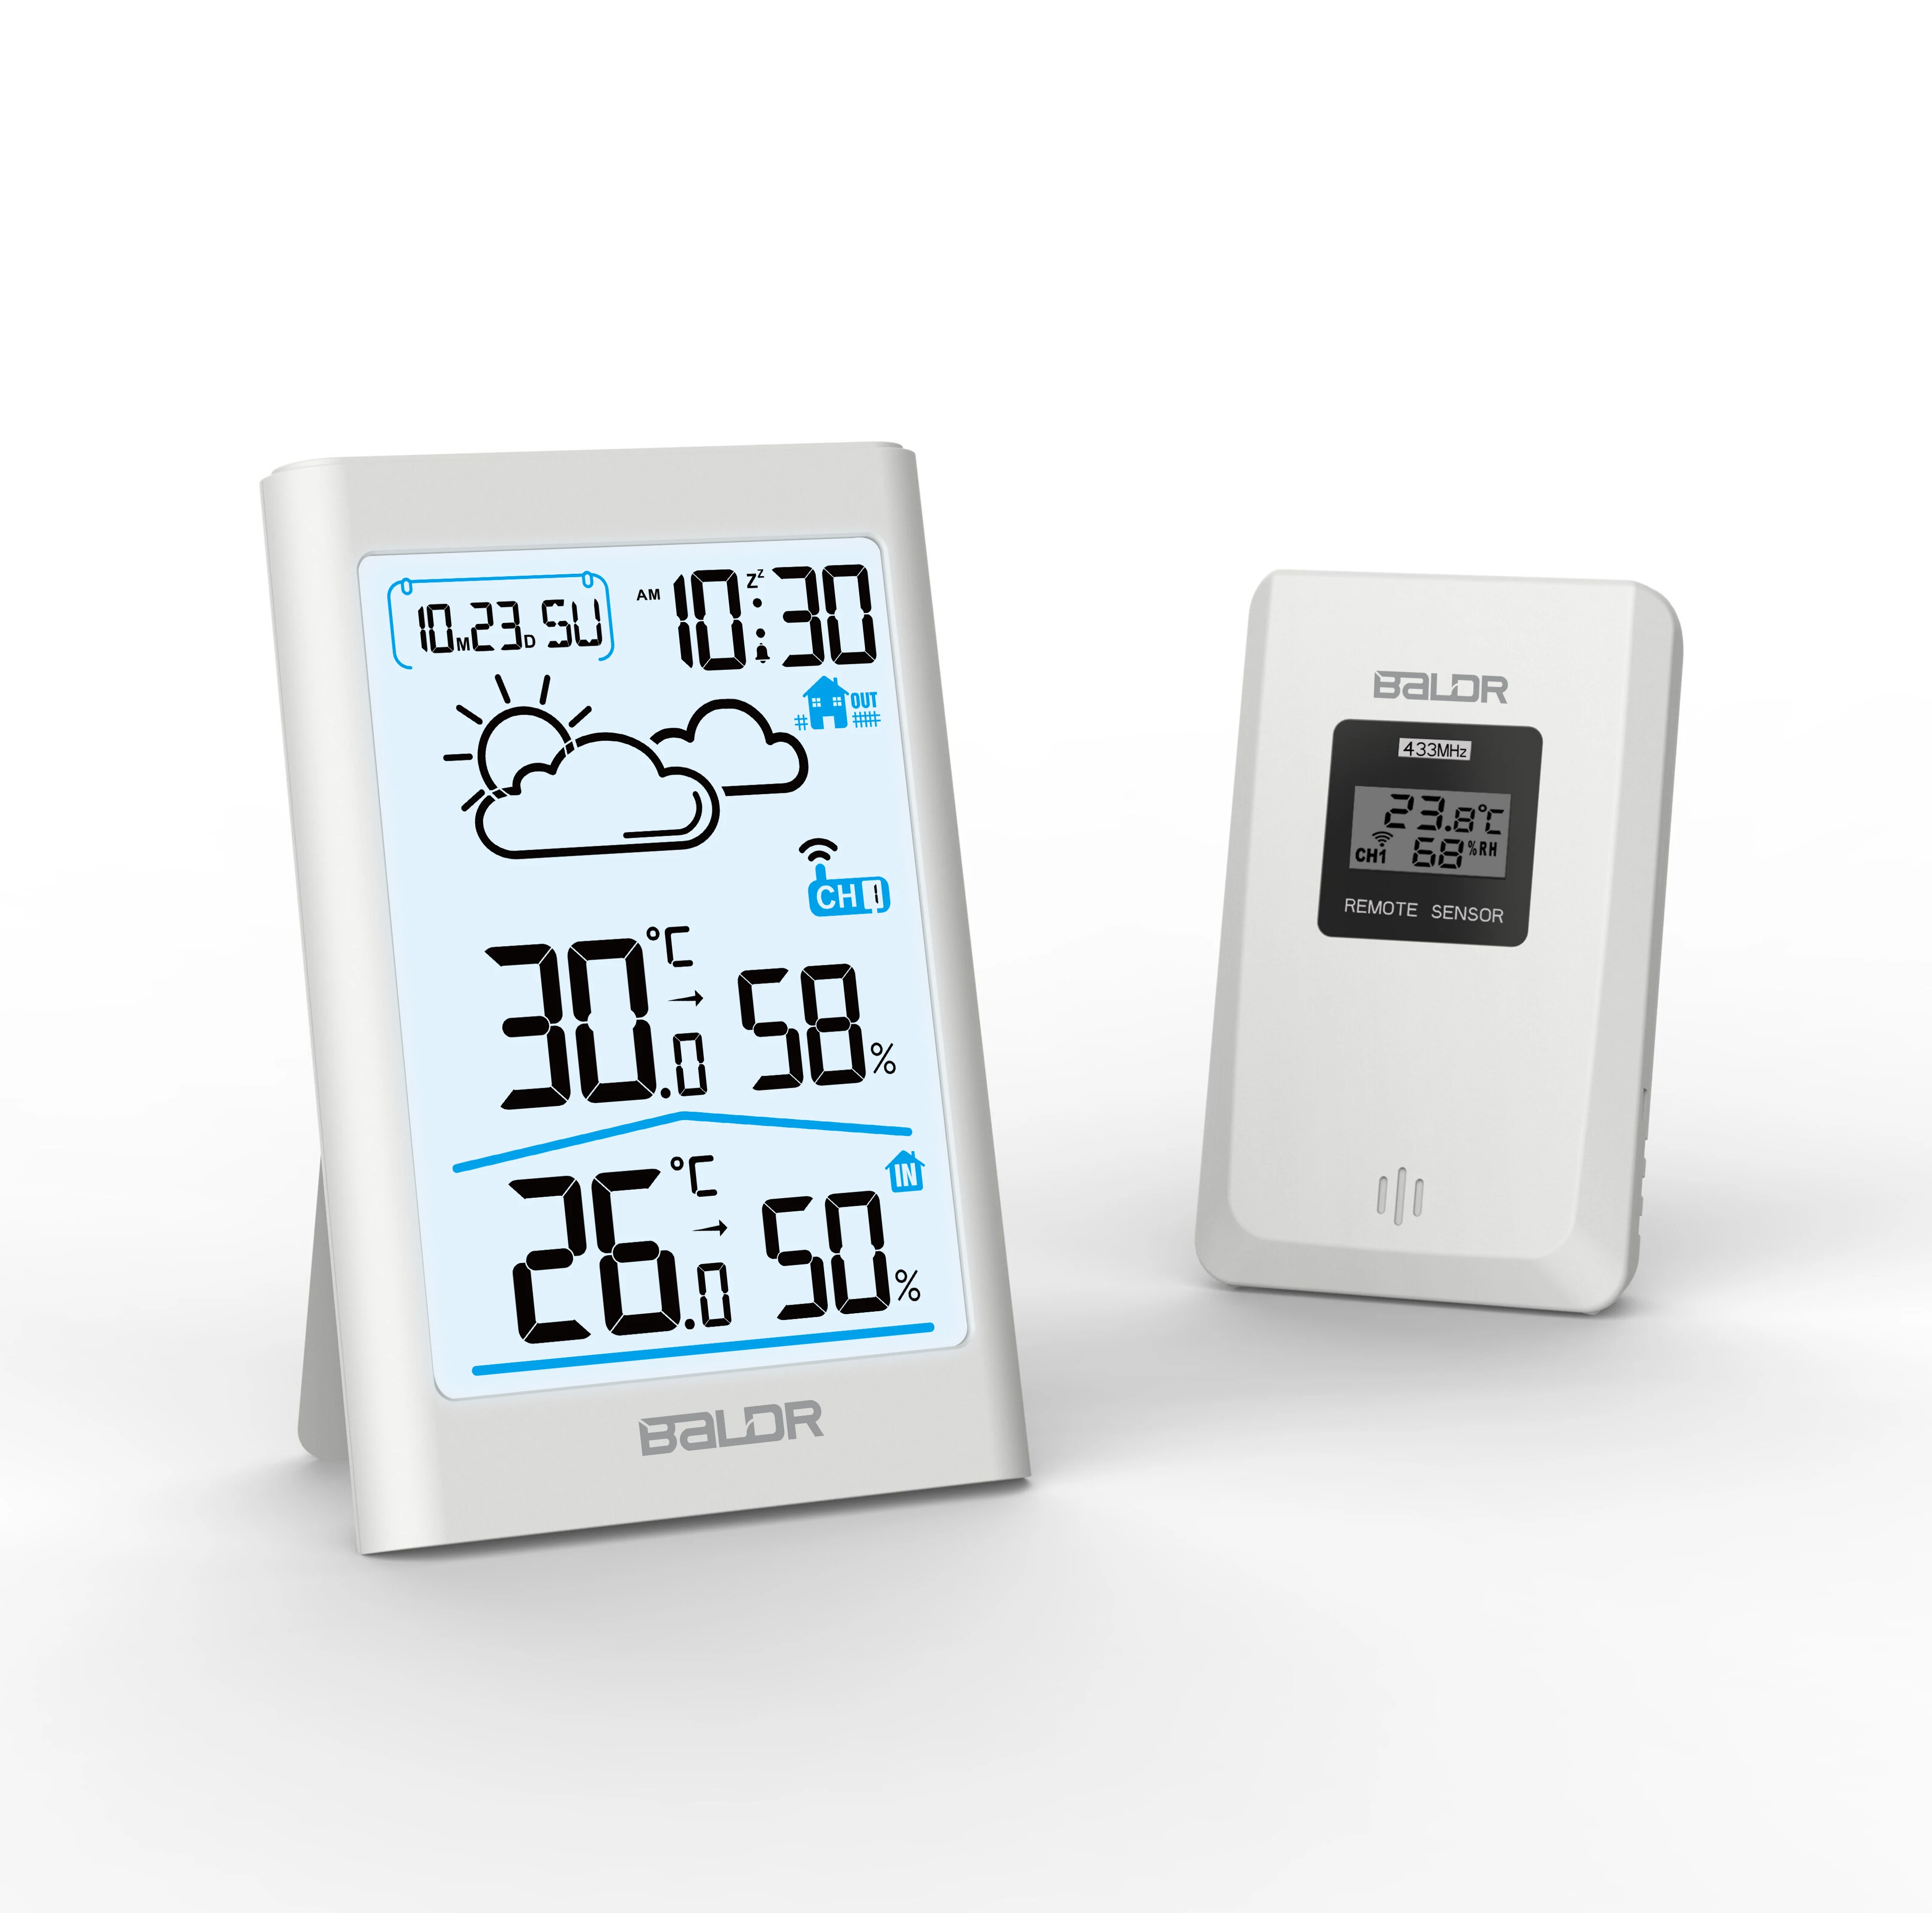 

BALDR B0341 Digital Weather Station Indoor/Outdoor Thermometer Hygrometer with Sensor Weather Forecast Wireless Wall Clock I